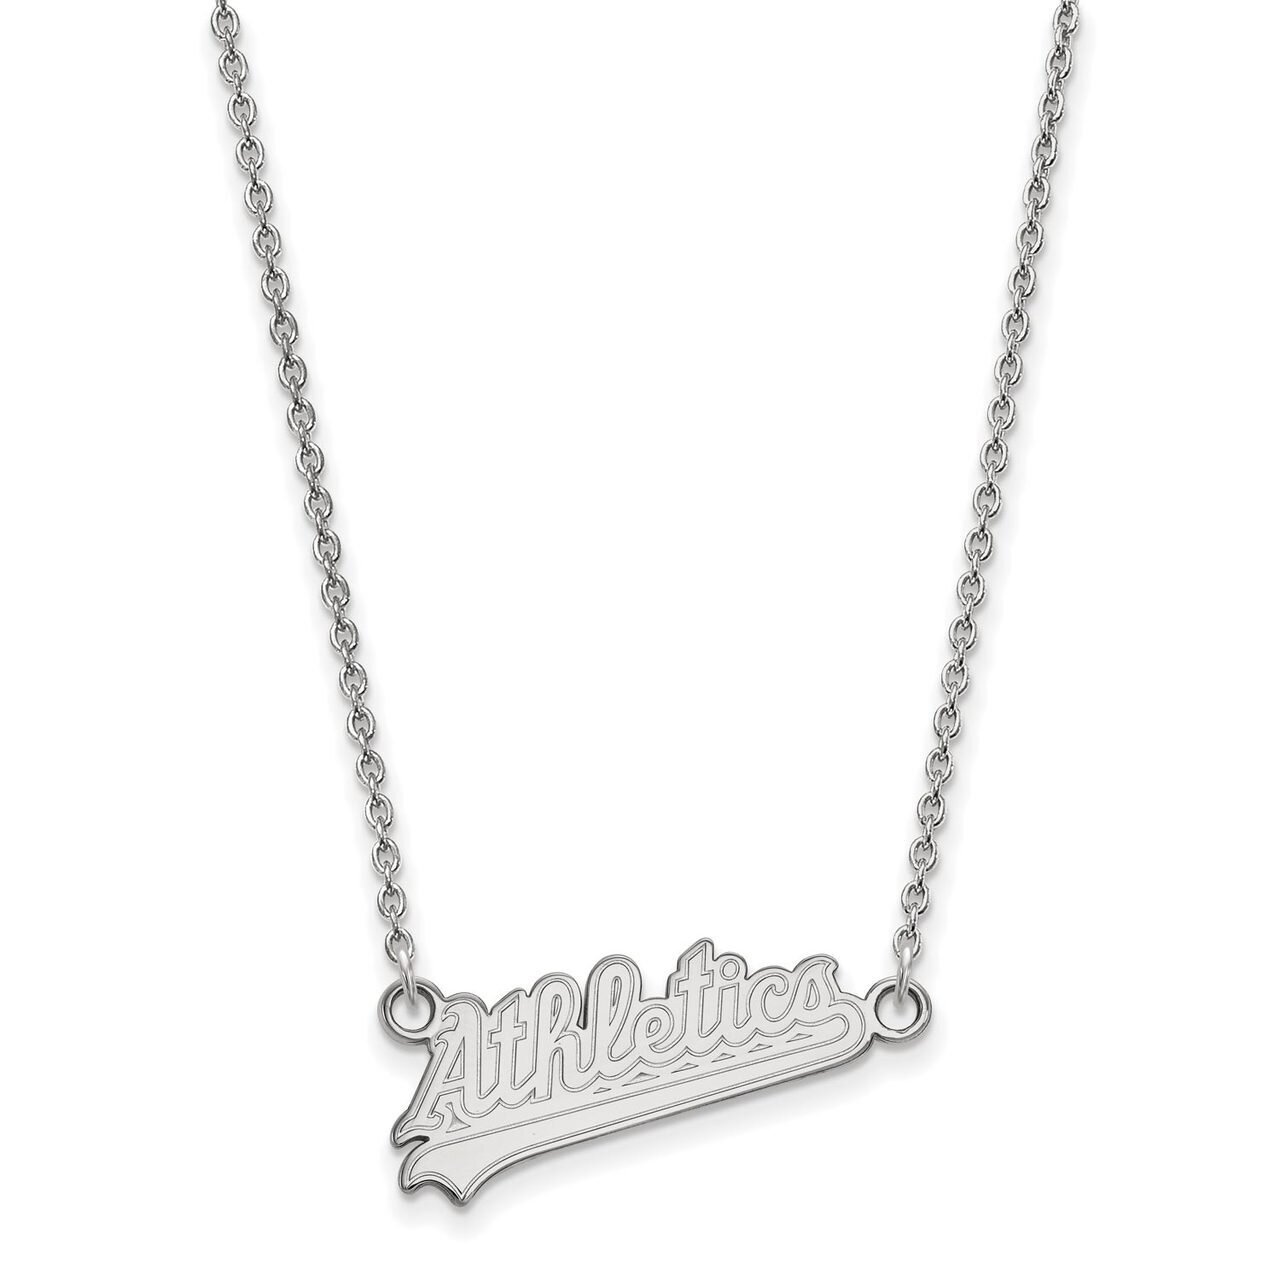 Oakland Athletics Small Pendant with Chain Necklace 14k White Gold 4W016ATH-18